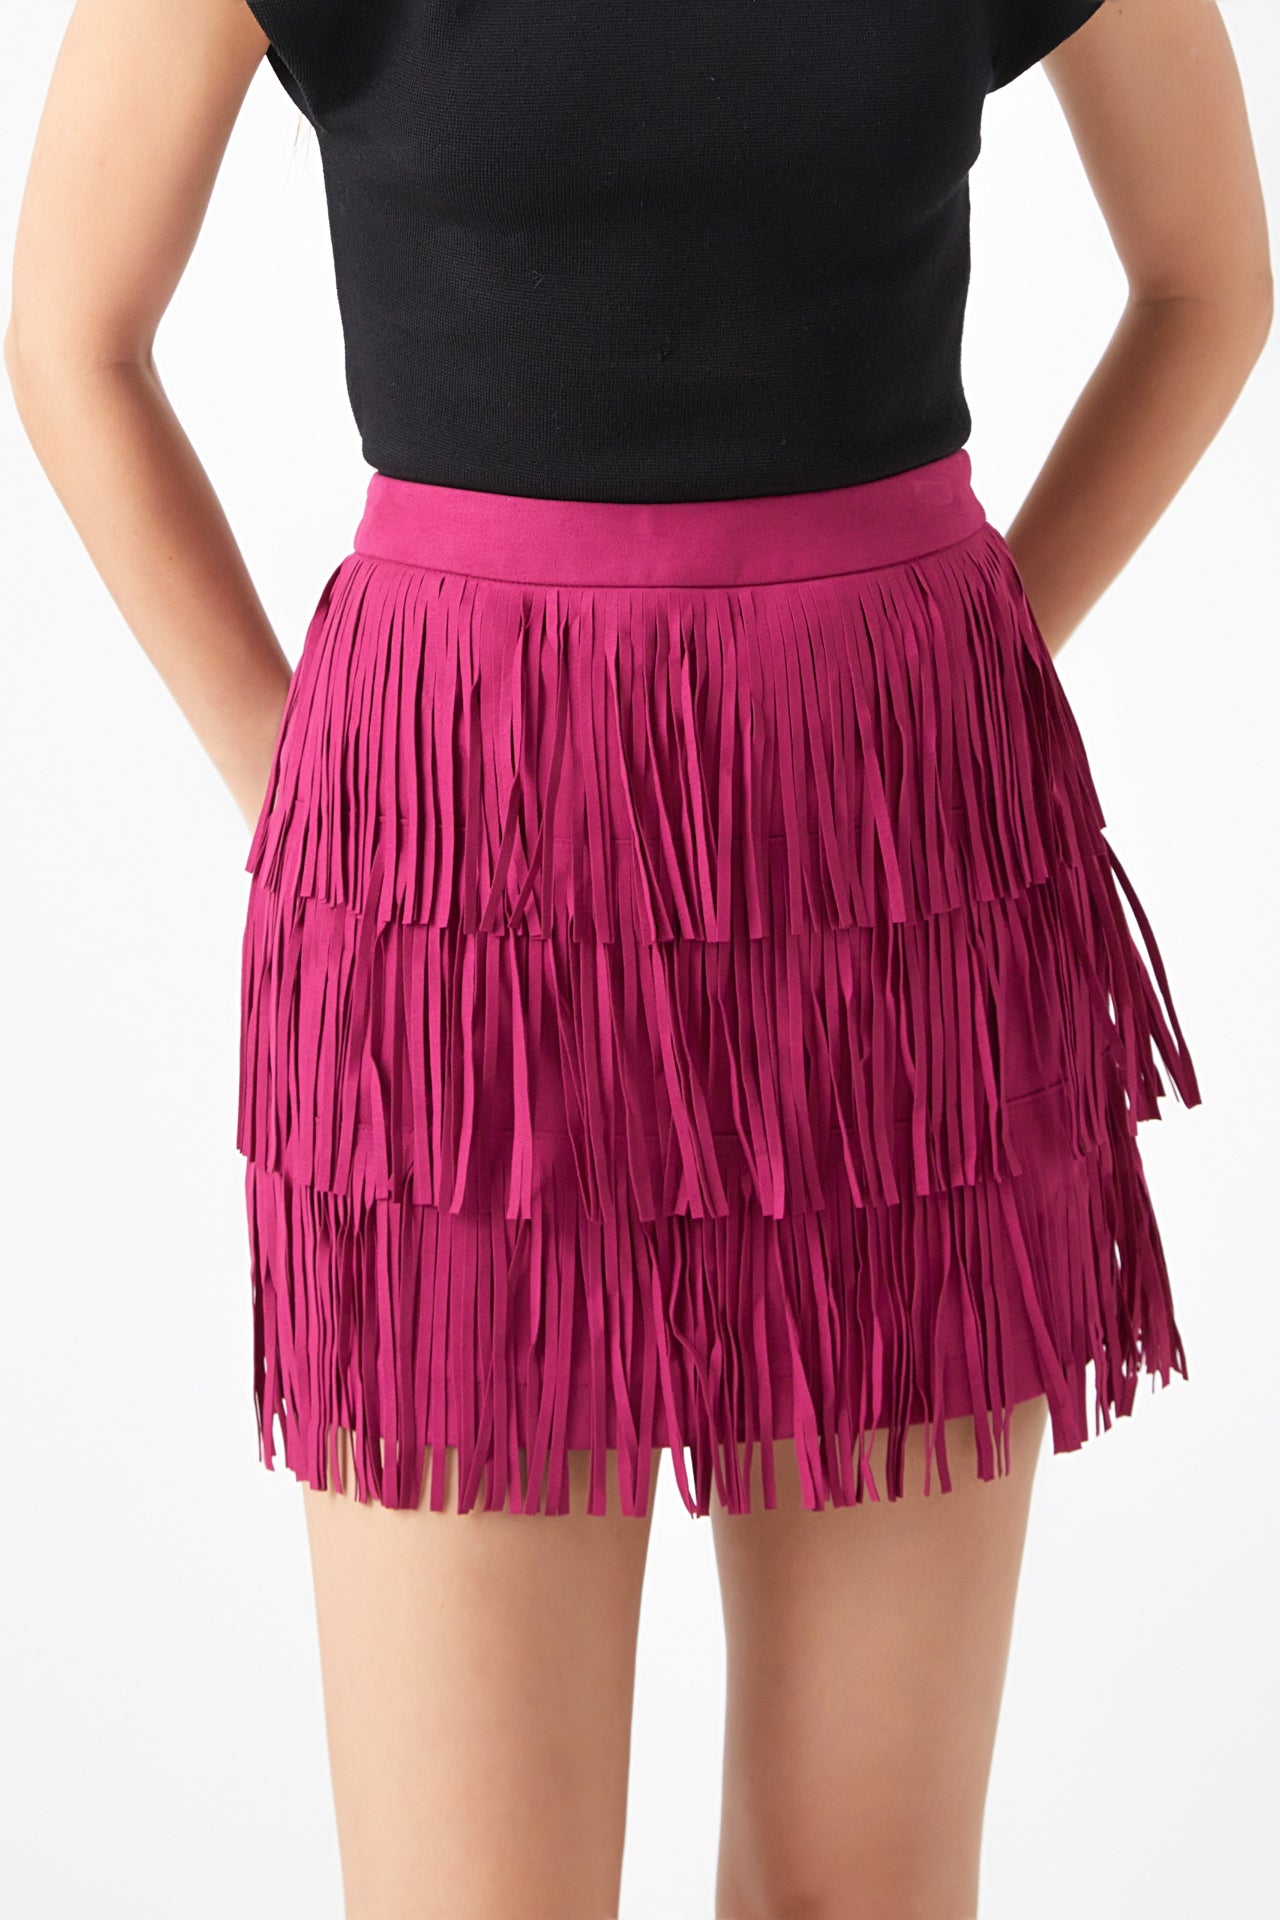 ENDLESS ROSE - Faux Suede Fringe Mini Skirt - SKIRTS available at Objectrare